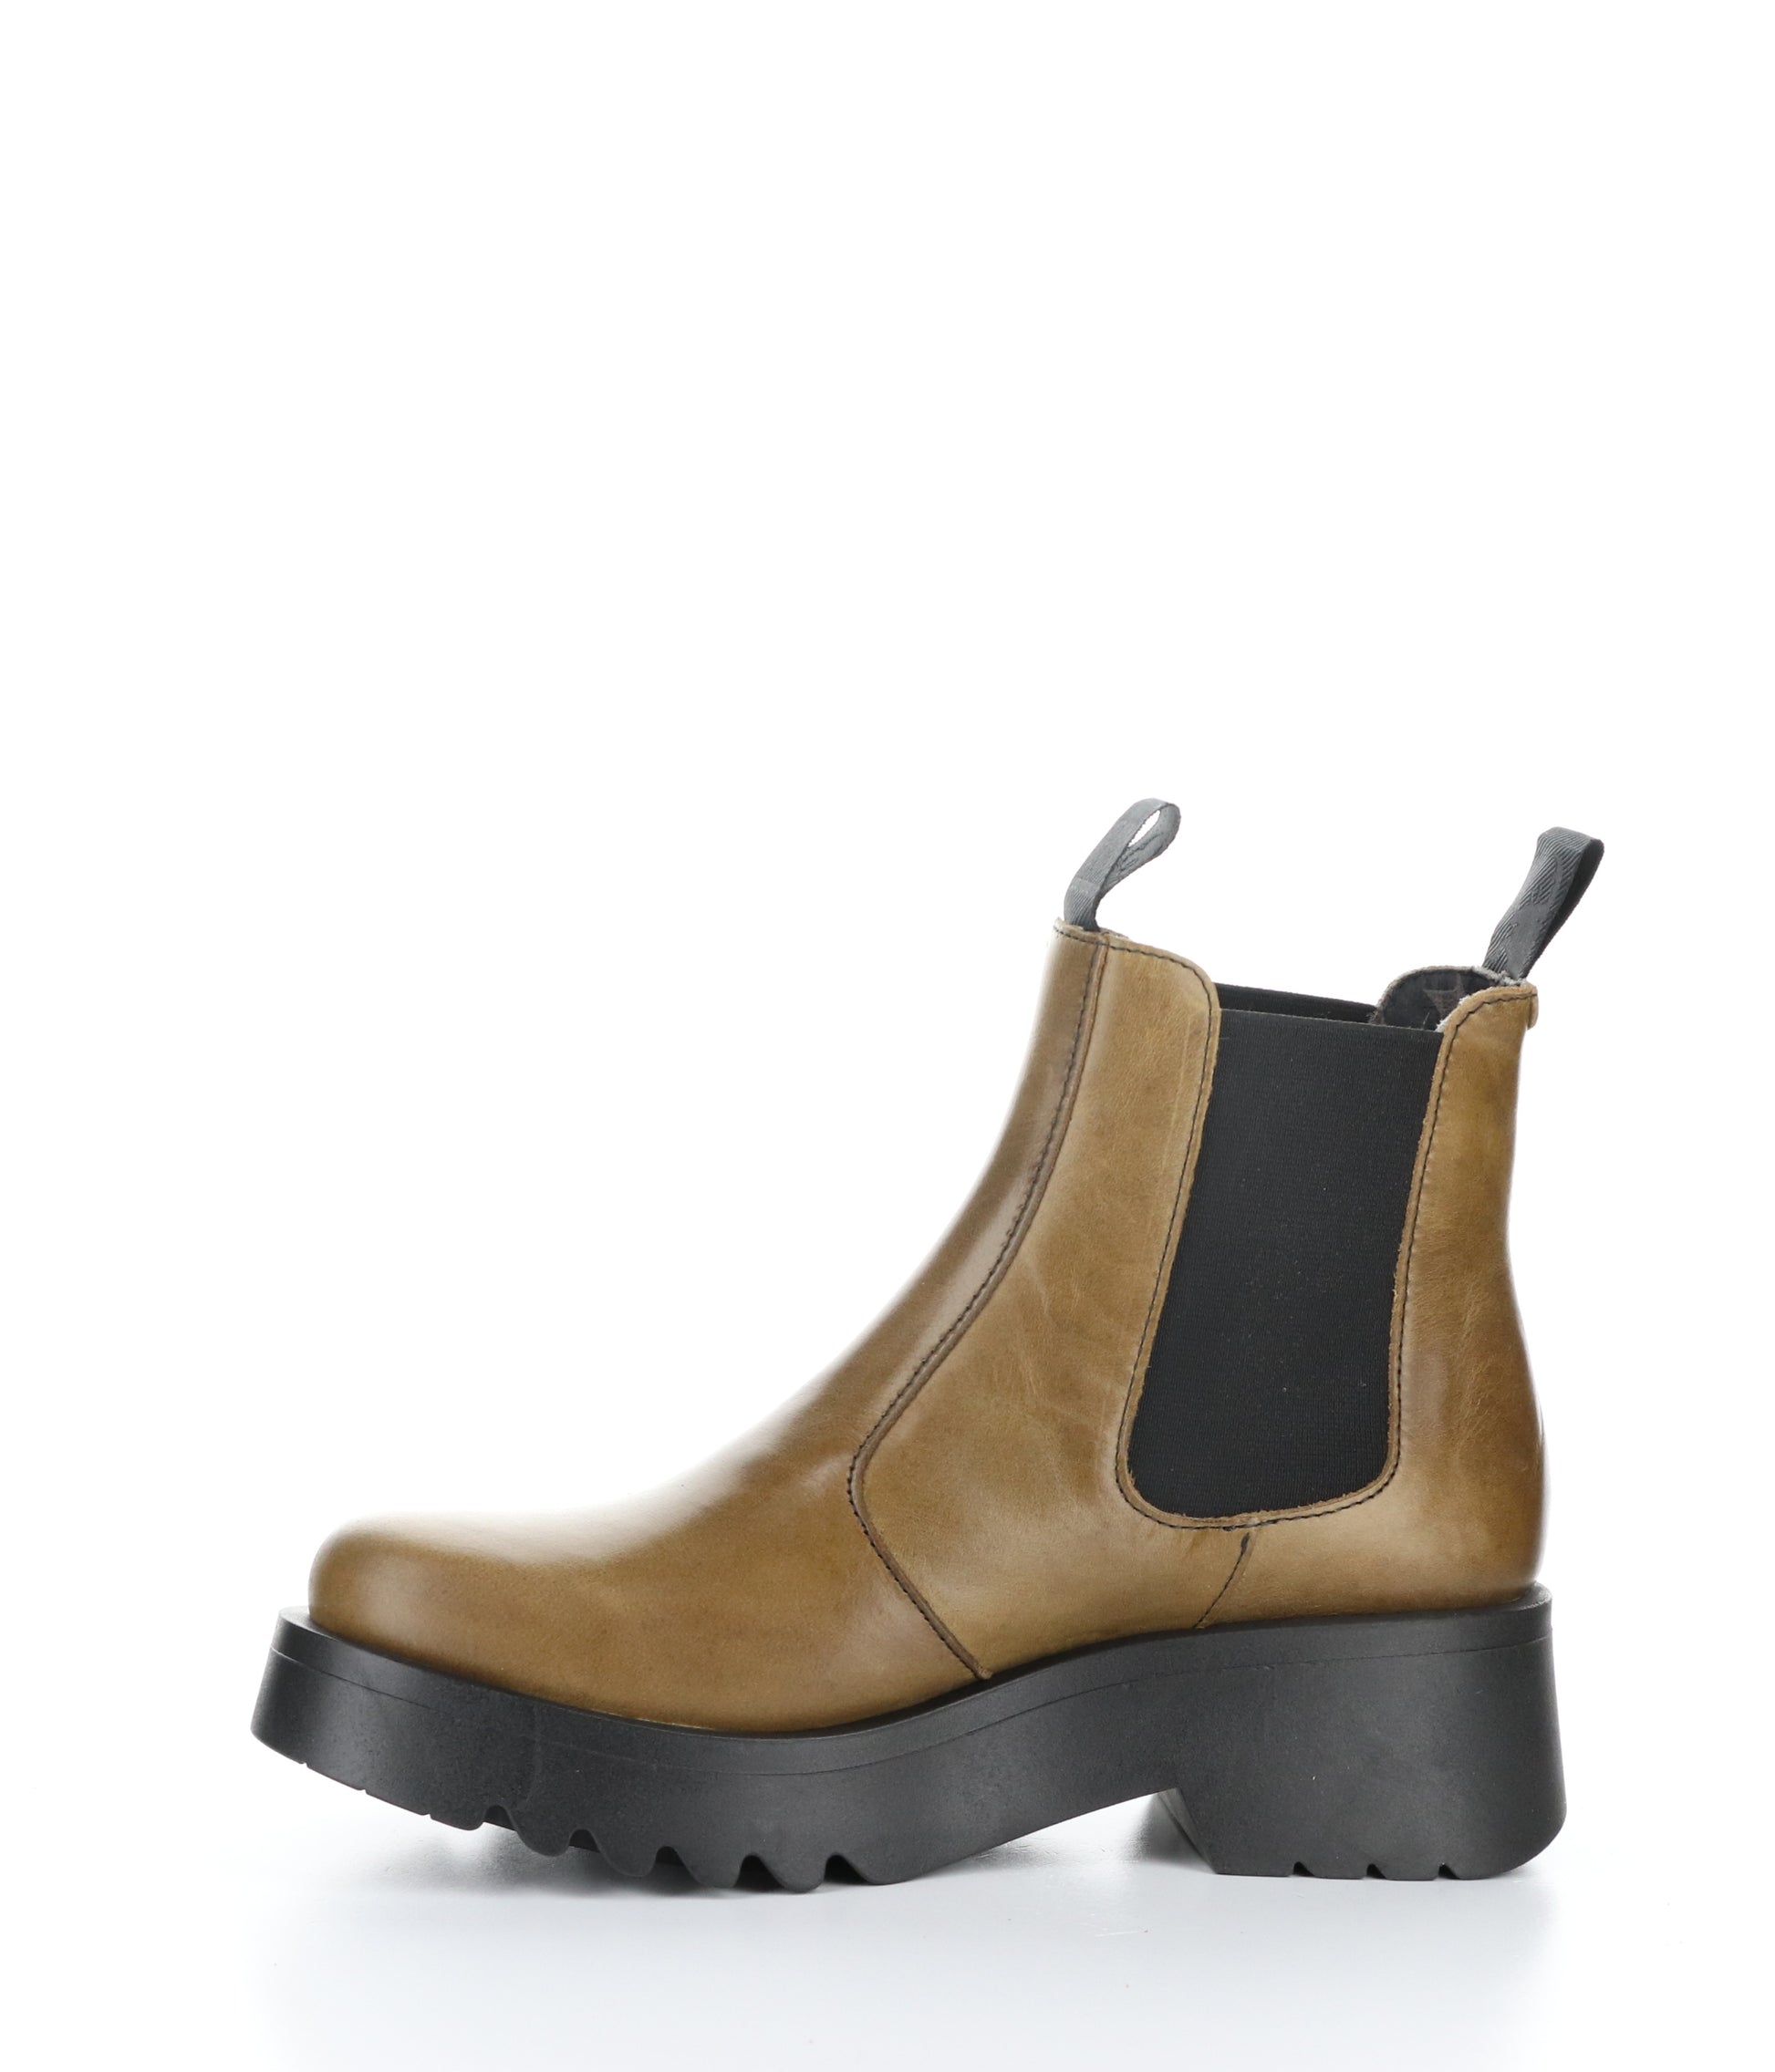 The left profile view of a brown Chelsea boot, with black elastic panel and a black, rubber, lug sole.